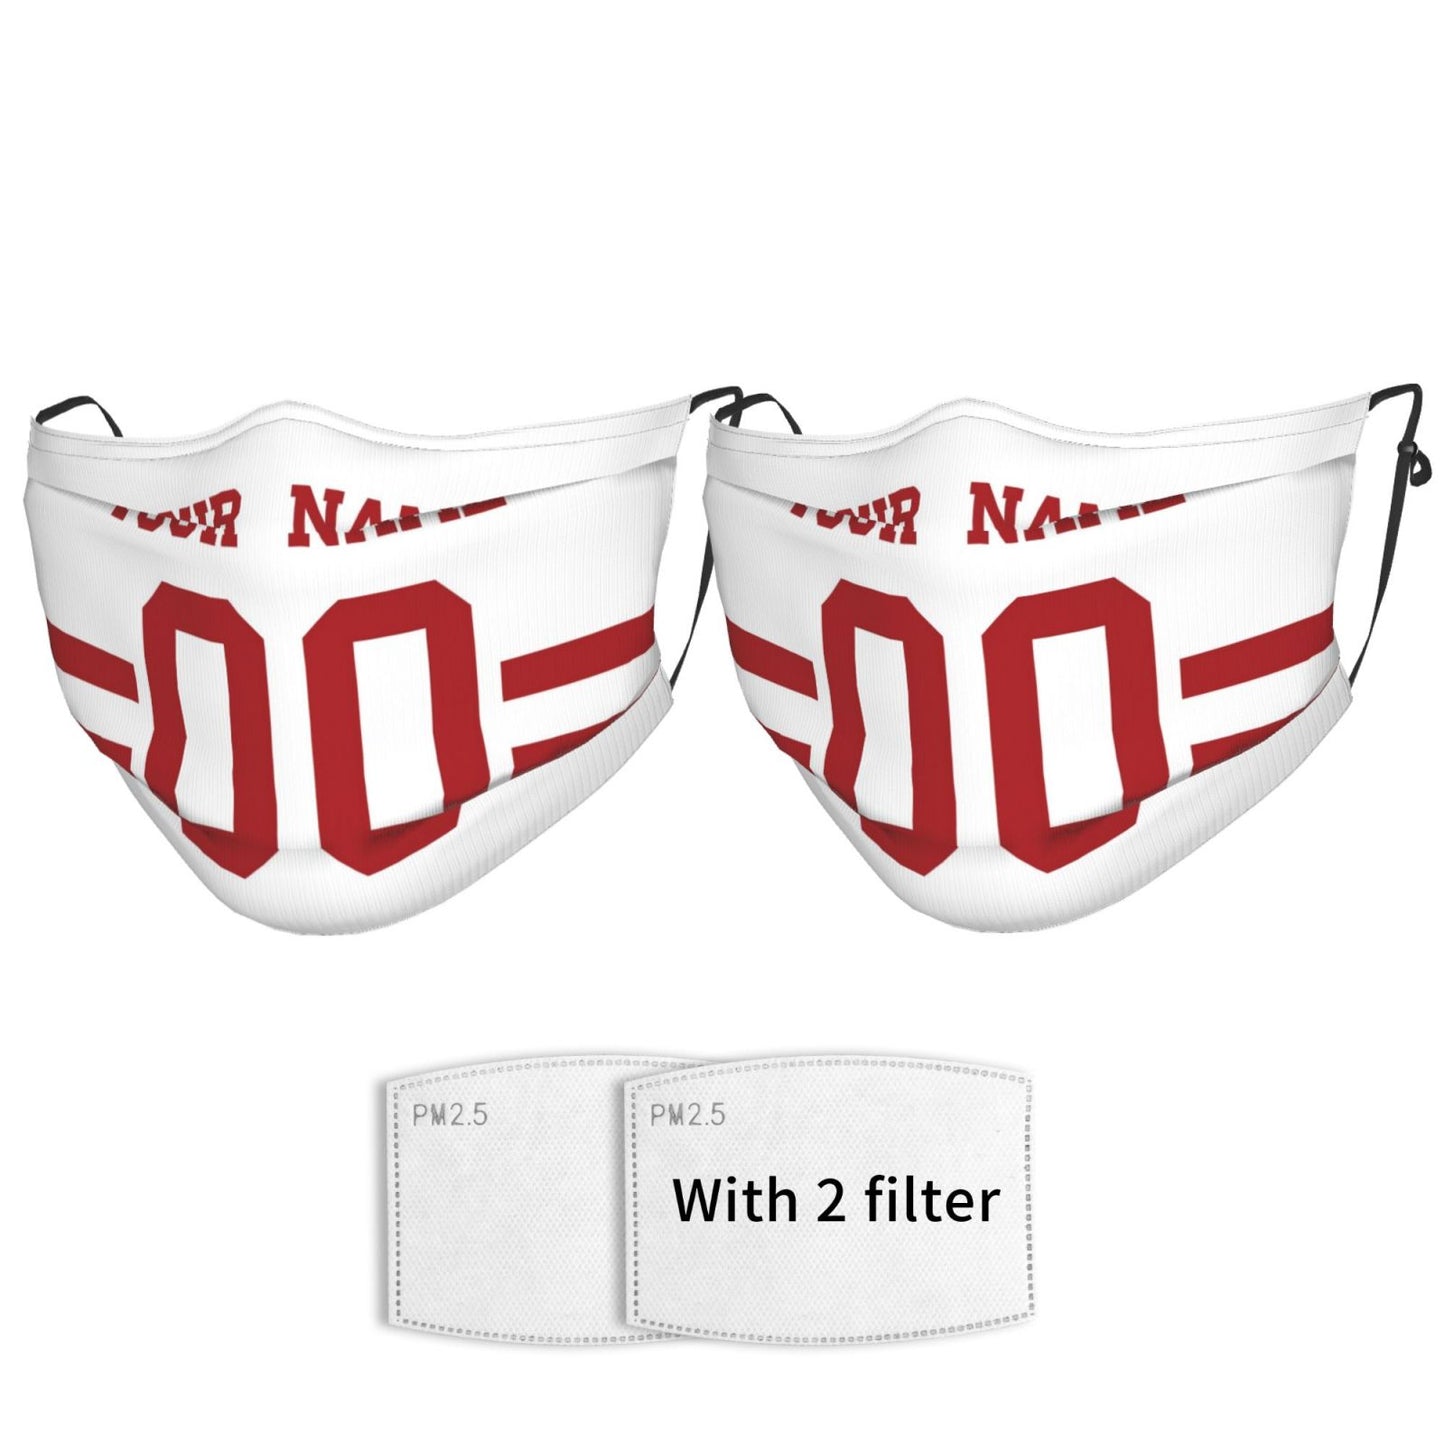 2-Pack San Francisco 49ers Face Covering Football Team Decorative Adult Face Mask With Filters PM 2.5 White